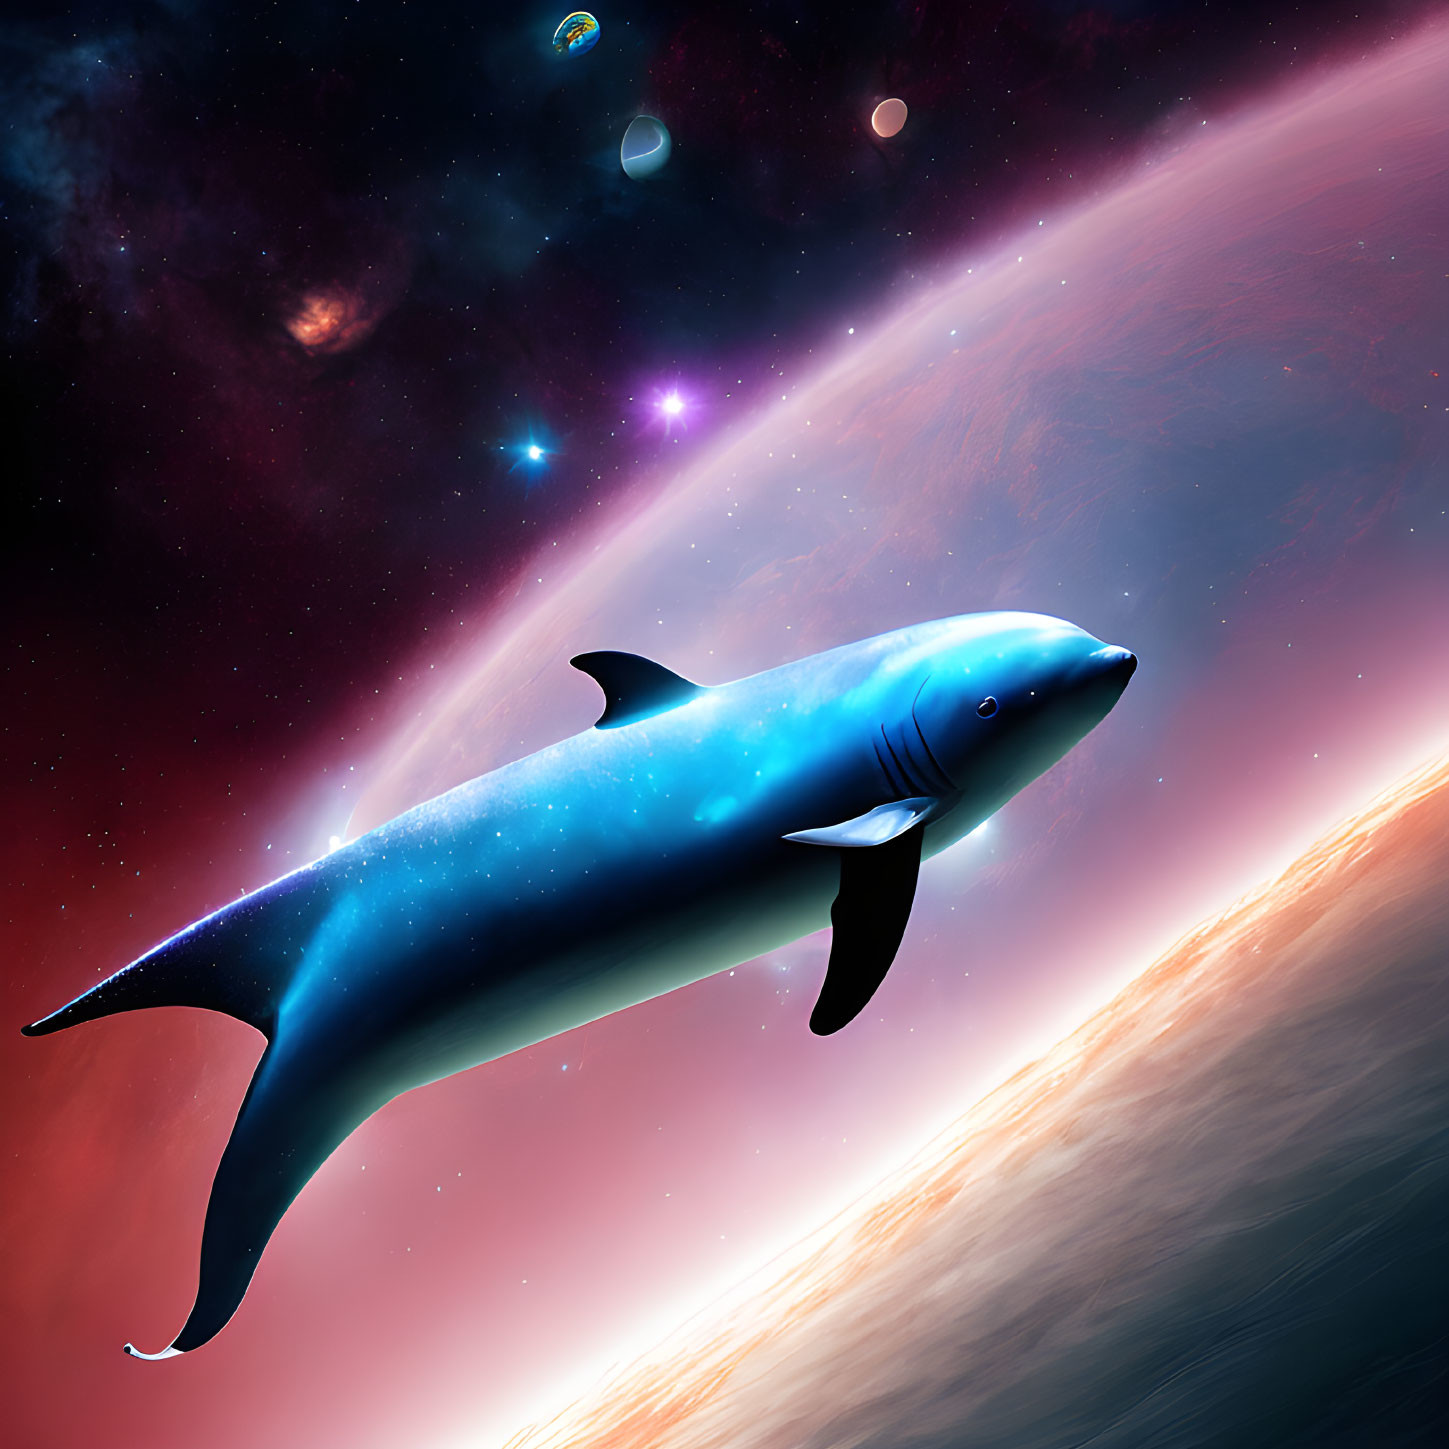 Starry cosmic whale swimming near vibrant planet in space